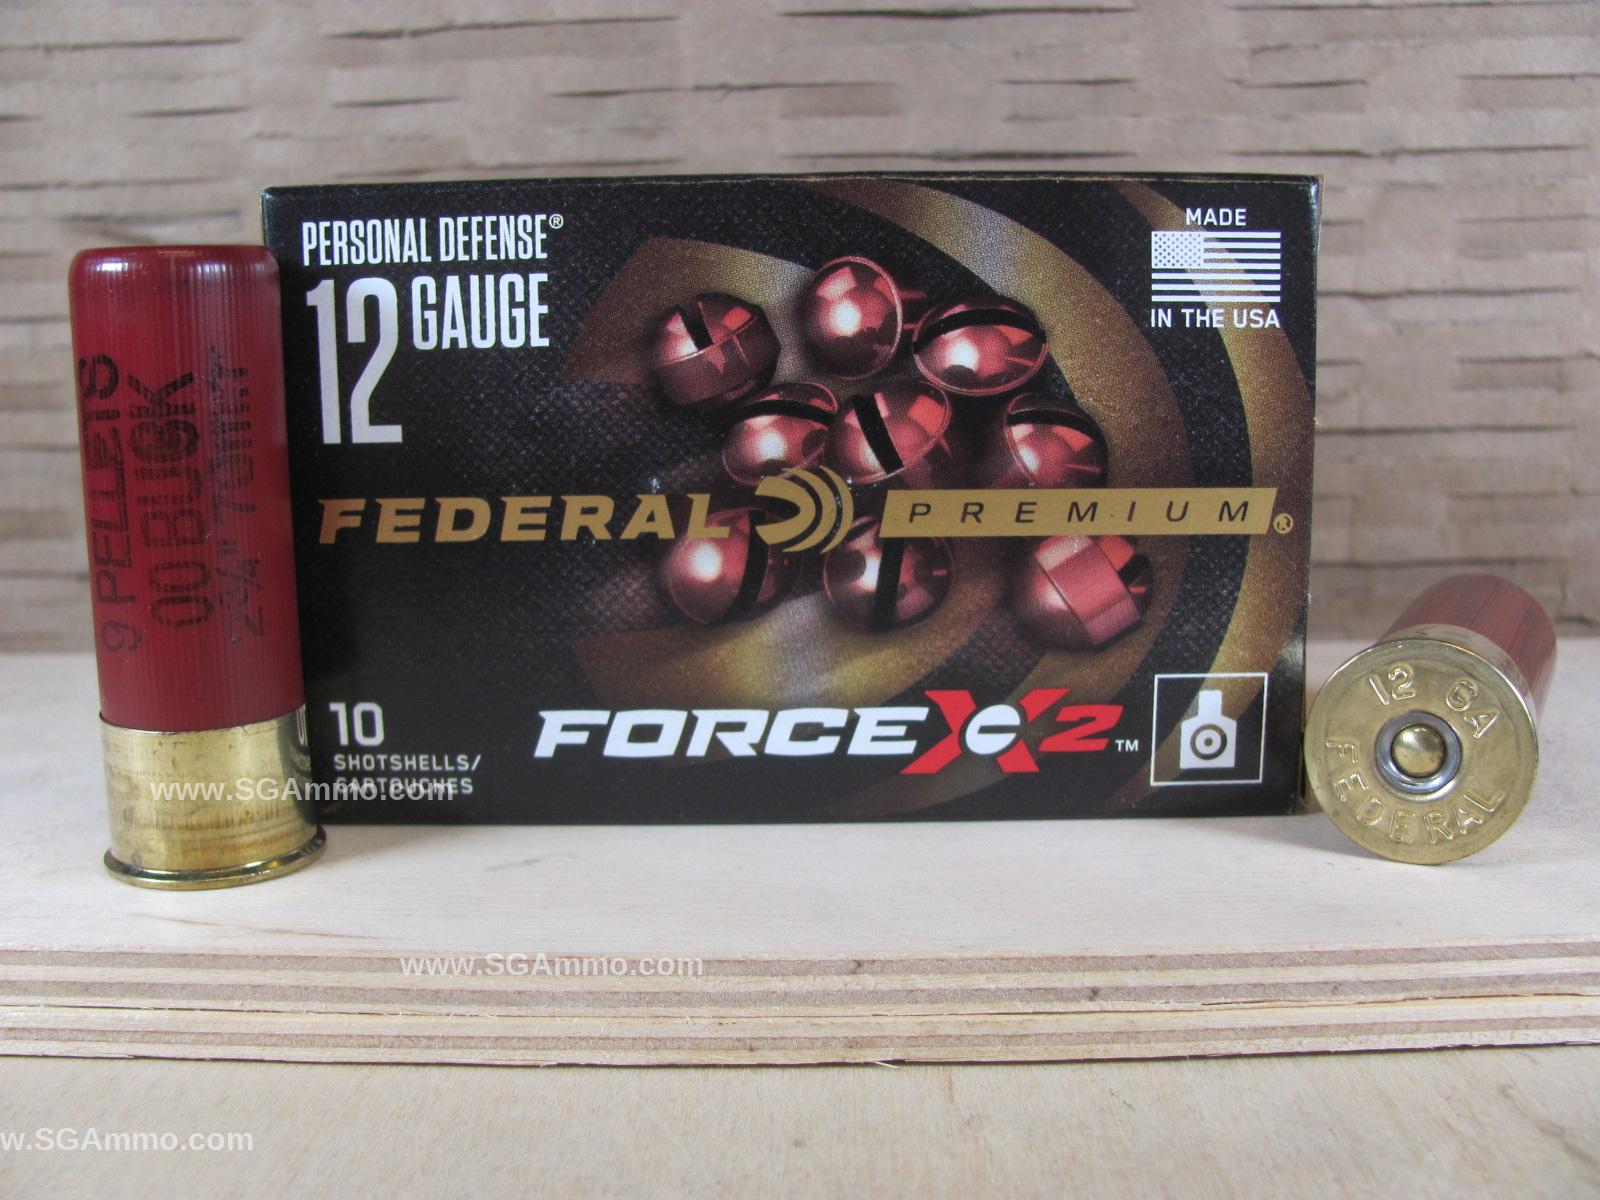 10 Round Box - 12 Gauge 2.75 Inch 9 Pellet 00 Buck Federal ForceX2 Ammo - PD12FX200